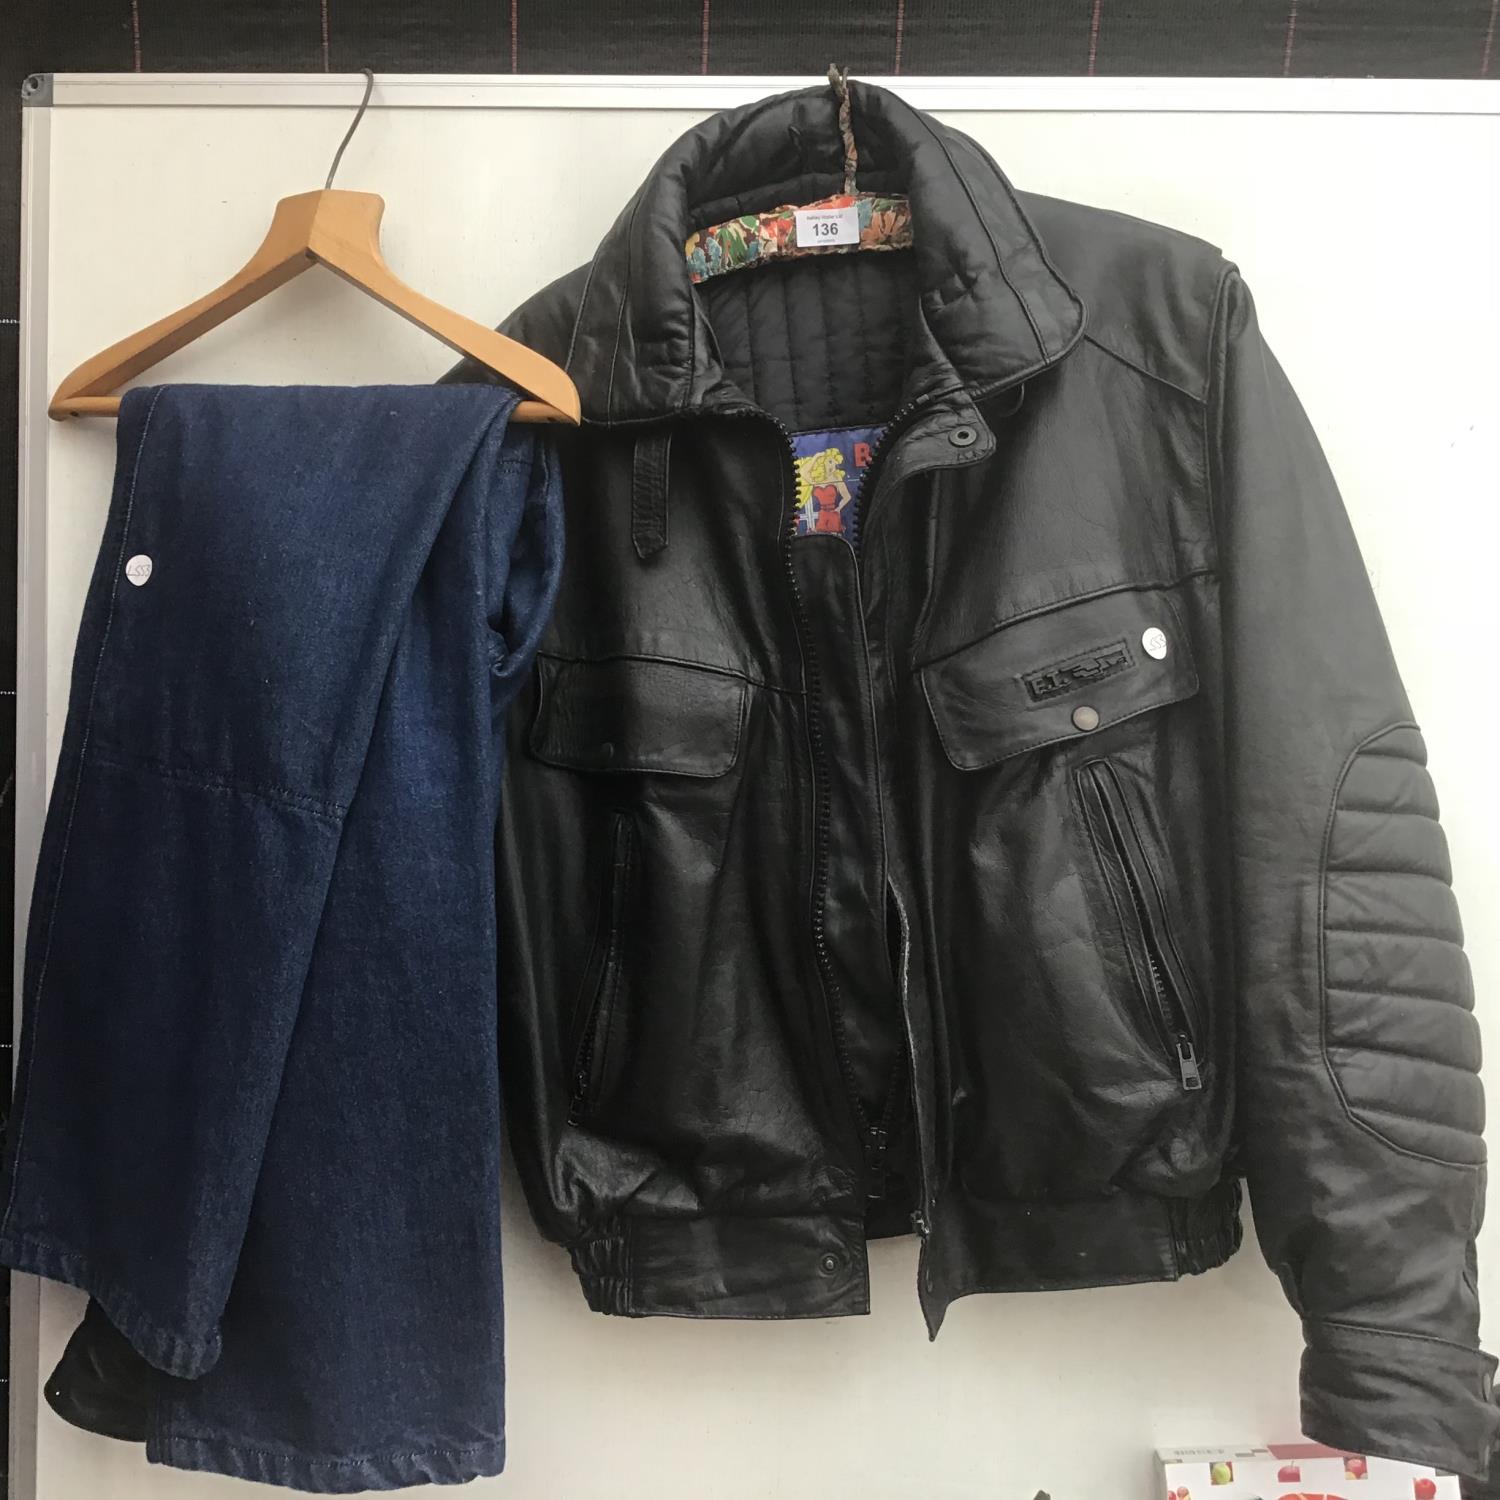 A BLACK LEATHER 'E.T' JACKET AND A PAIR OF JEANS